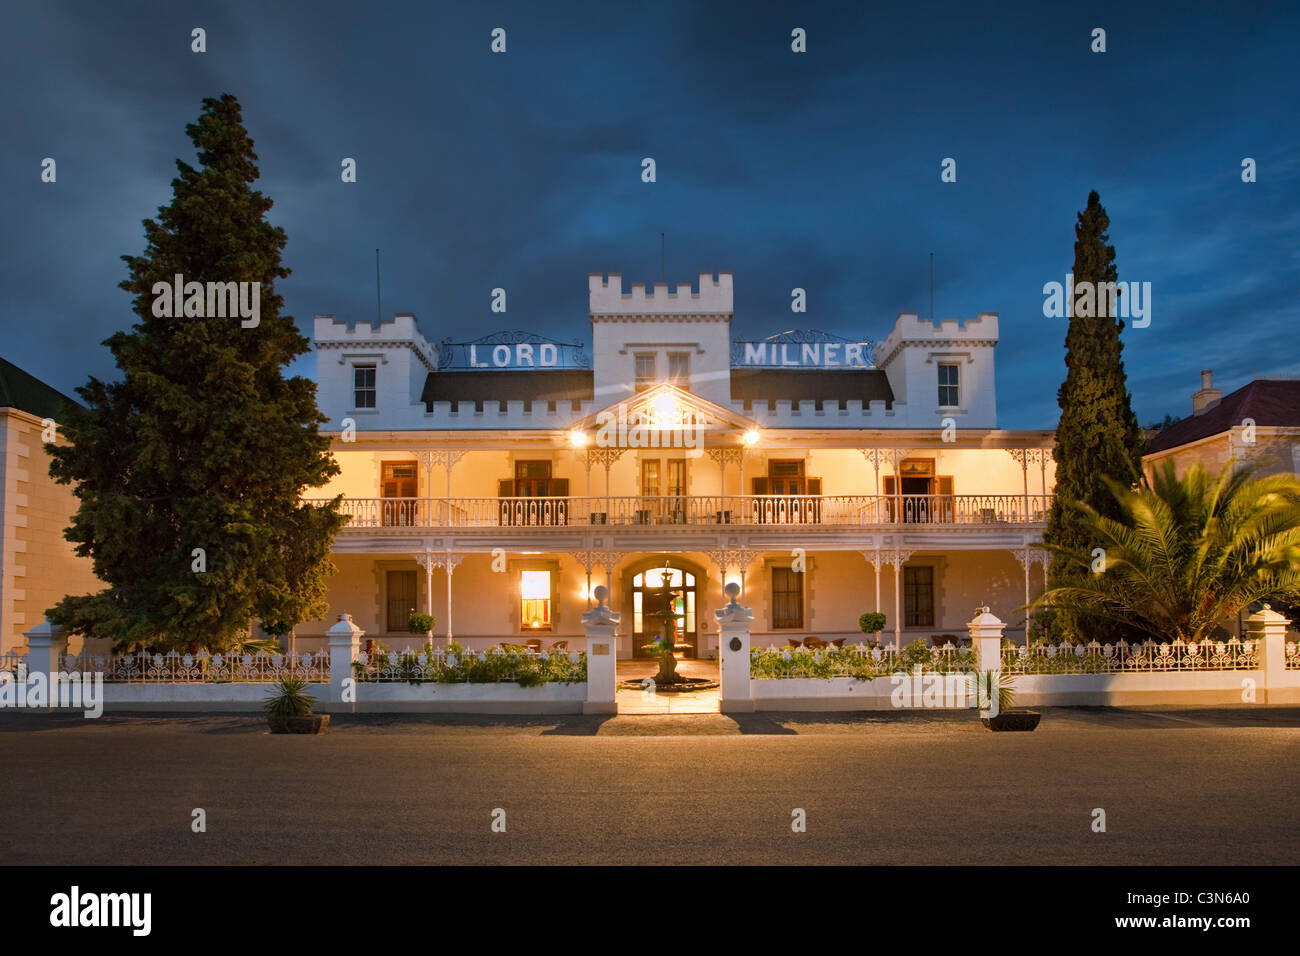 South Africa, Western Cape, Matjiesfontein, Historic Victorian village and railway station. Front of Lord Milner Hotel. Stock Photo